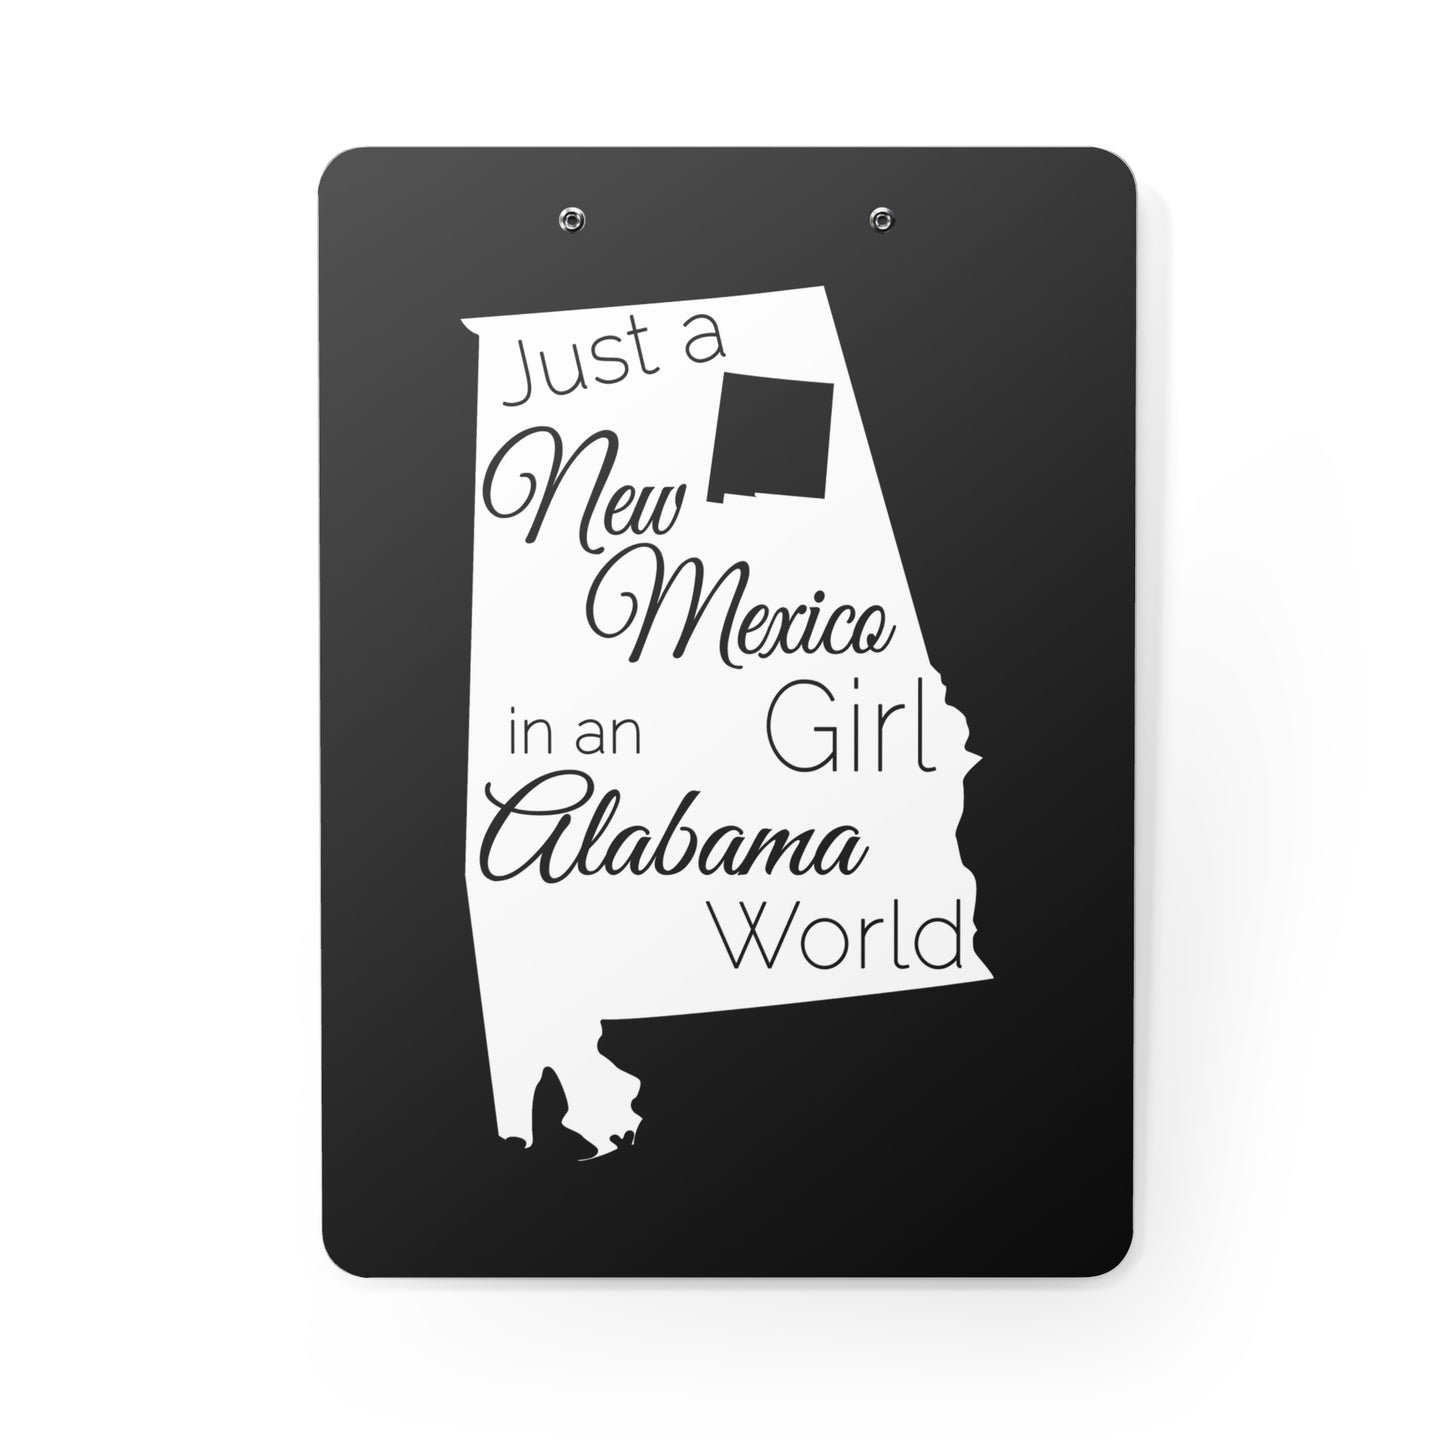 Just a New Mexico Girl in an Alabama World Clipboard